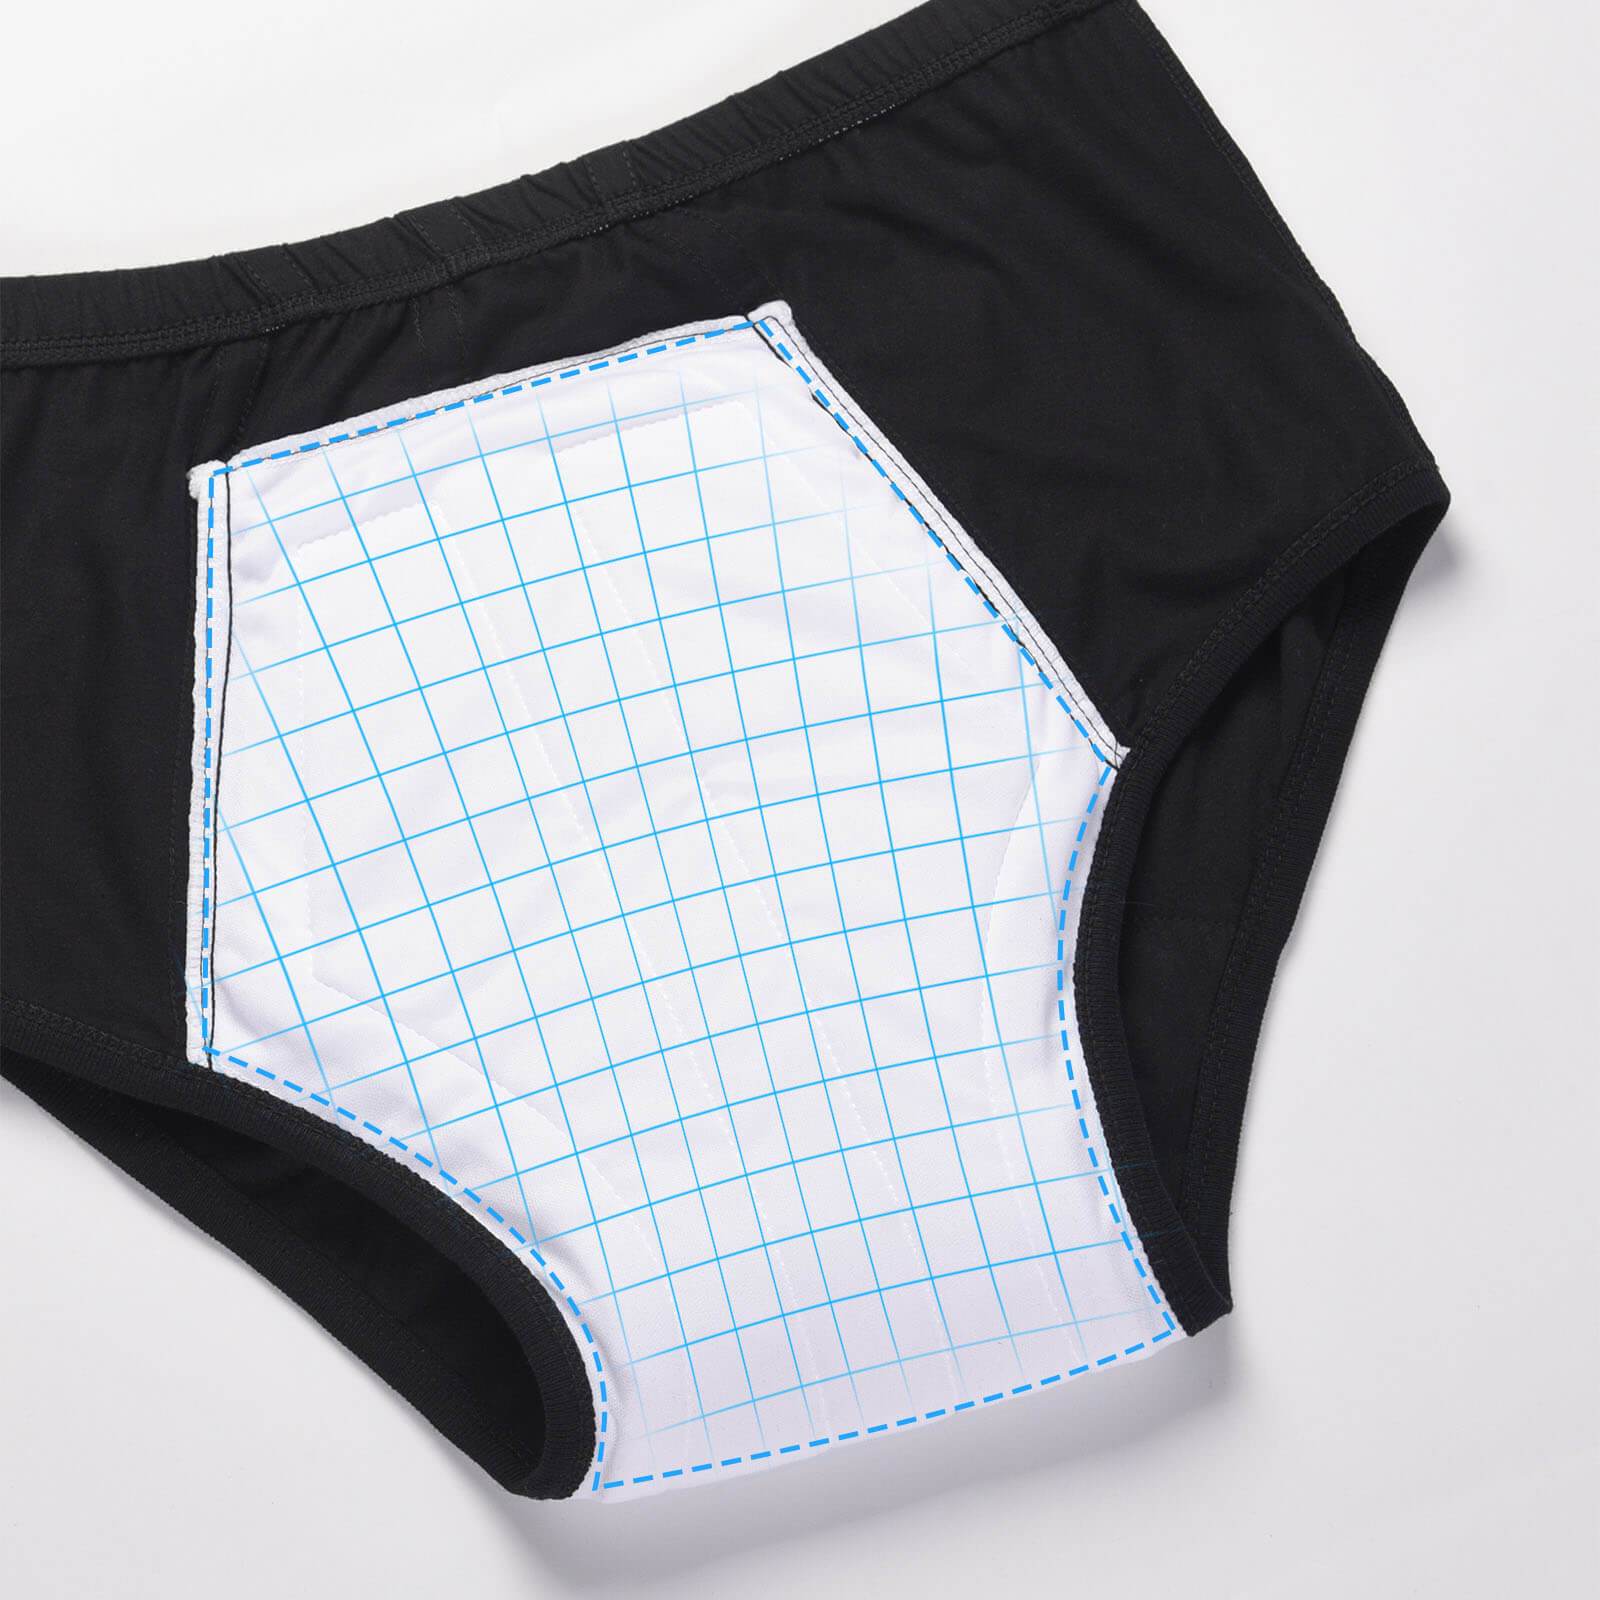 Men's Incontinence Briefs - M66 Mixed Pack